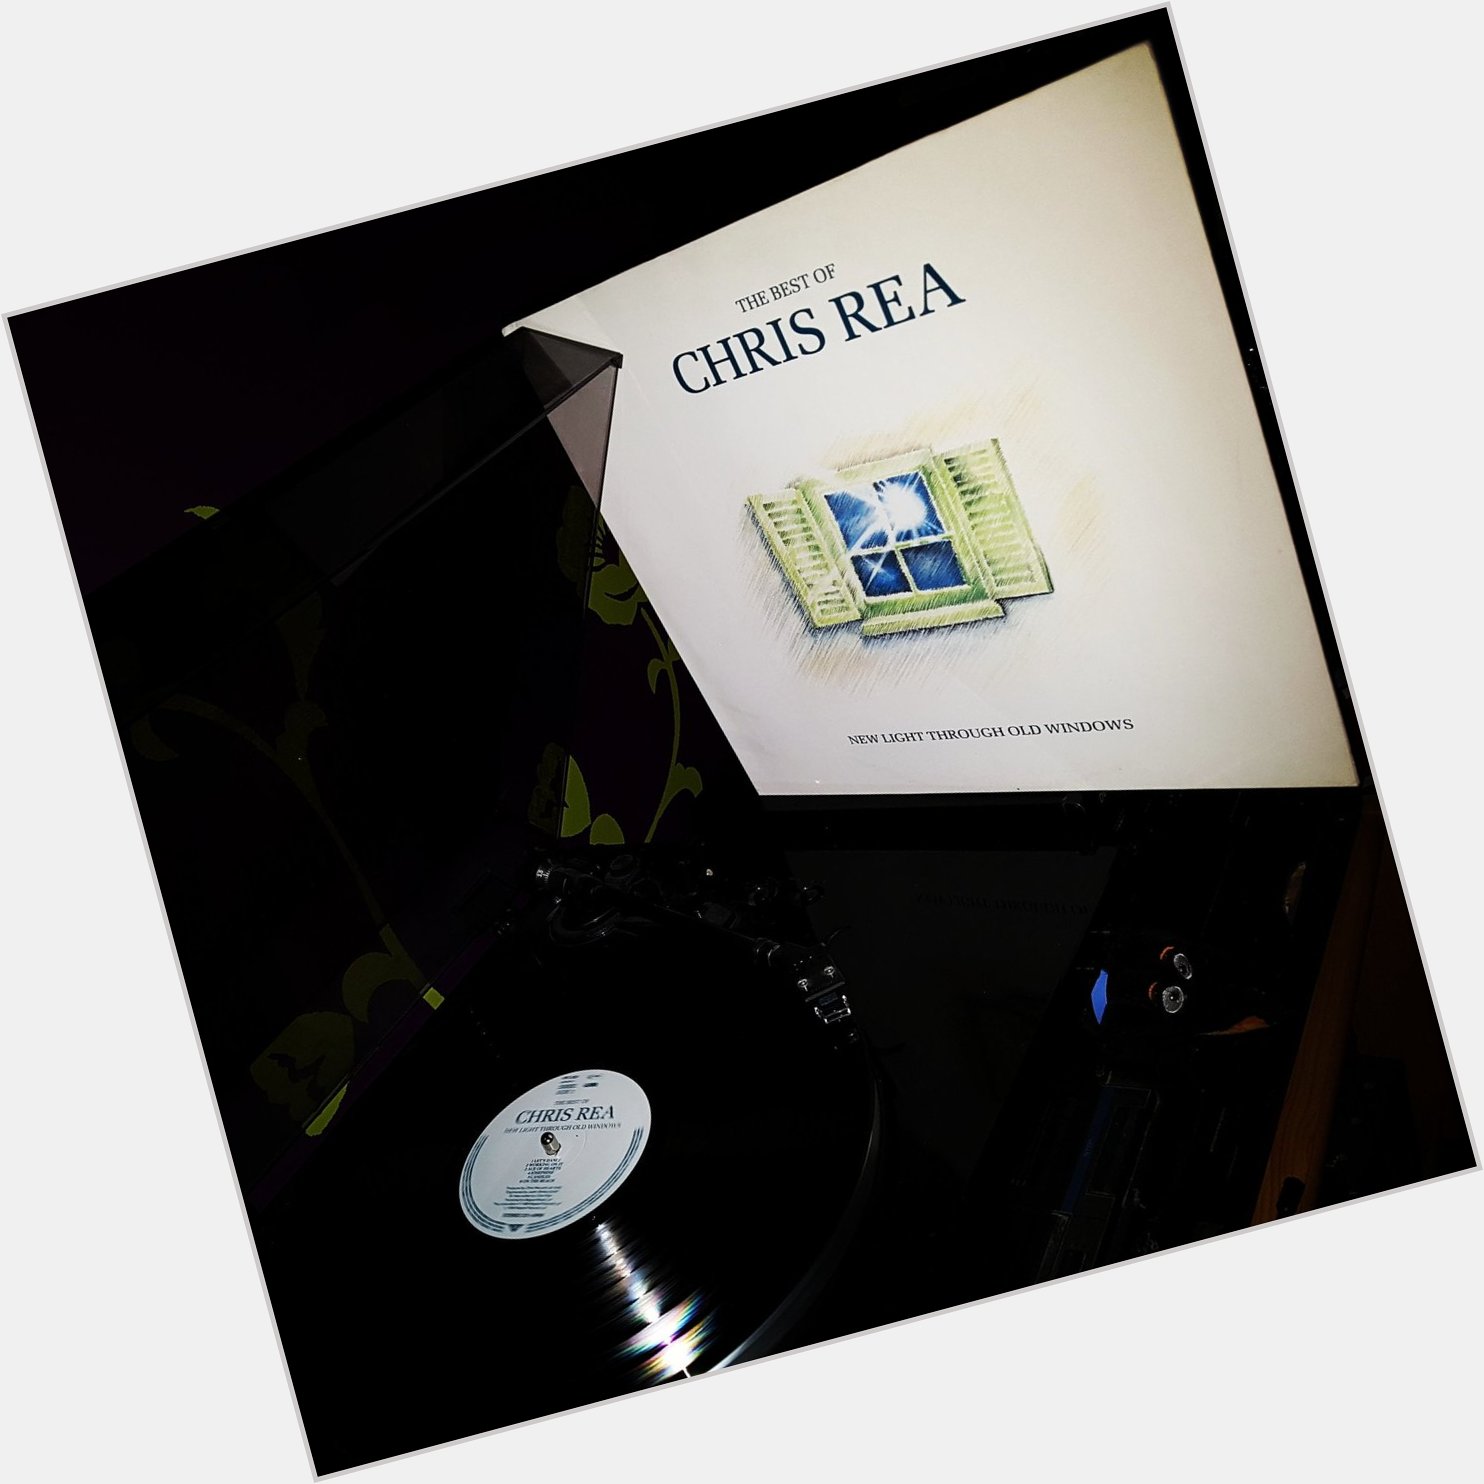 Happy Birthday Chris Rea *68*! New Light through old Windows - The Best of (1988/Magnet Records)  